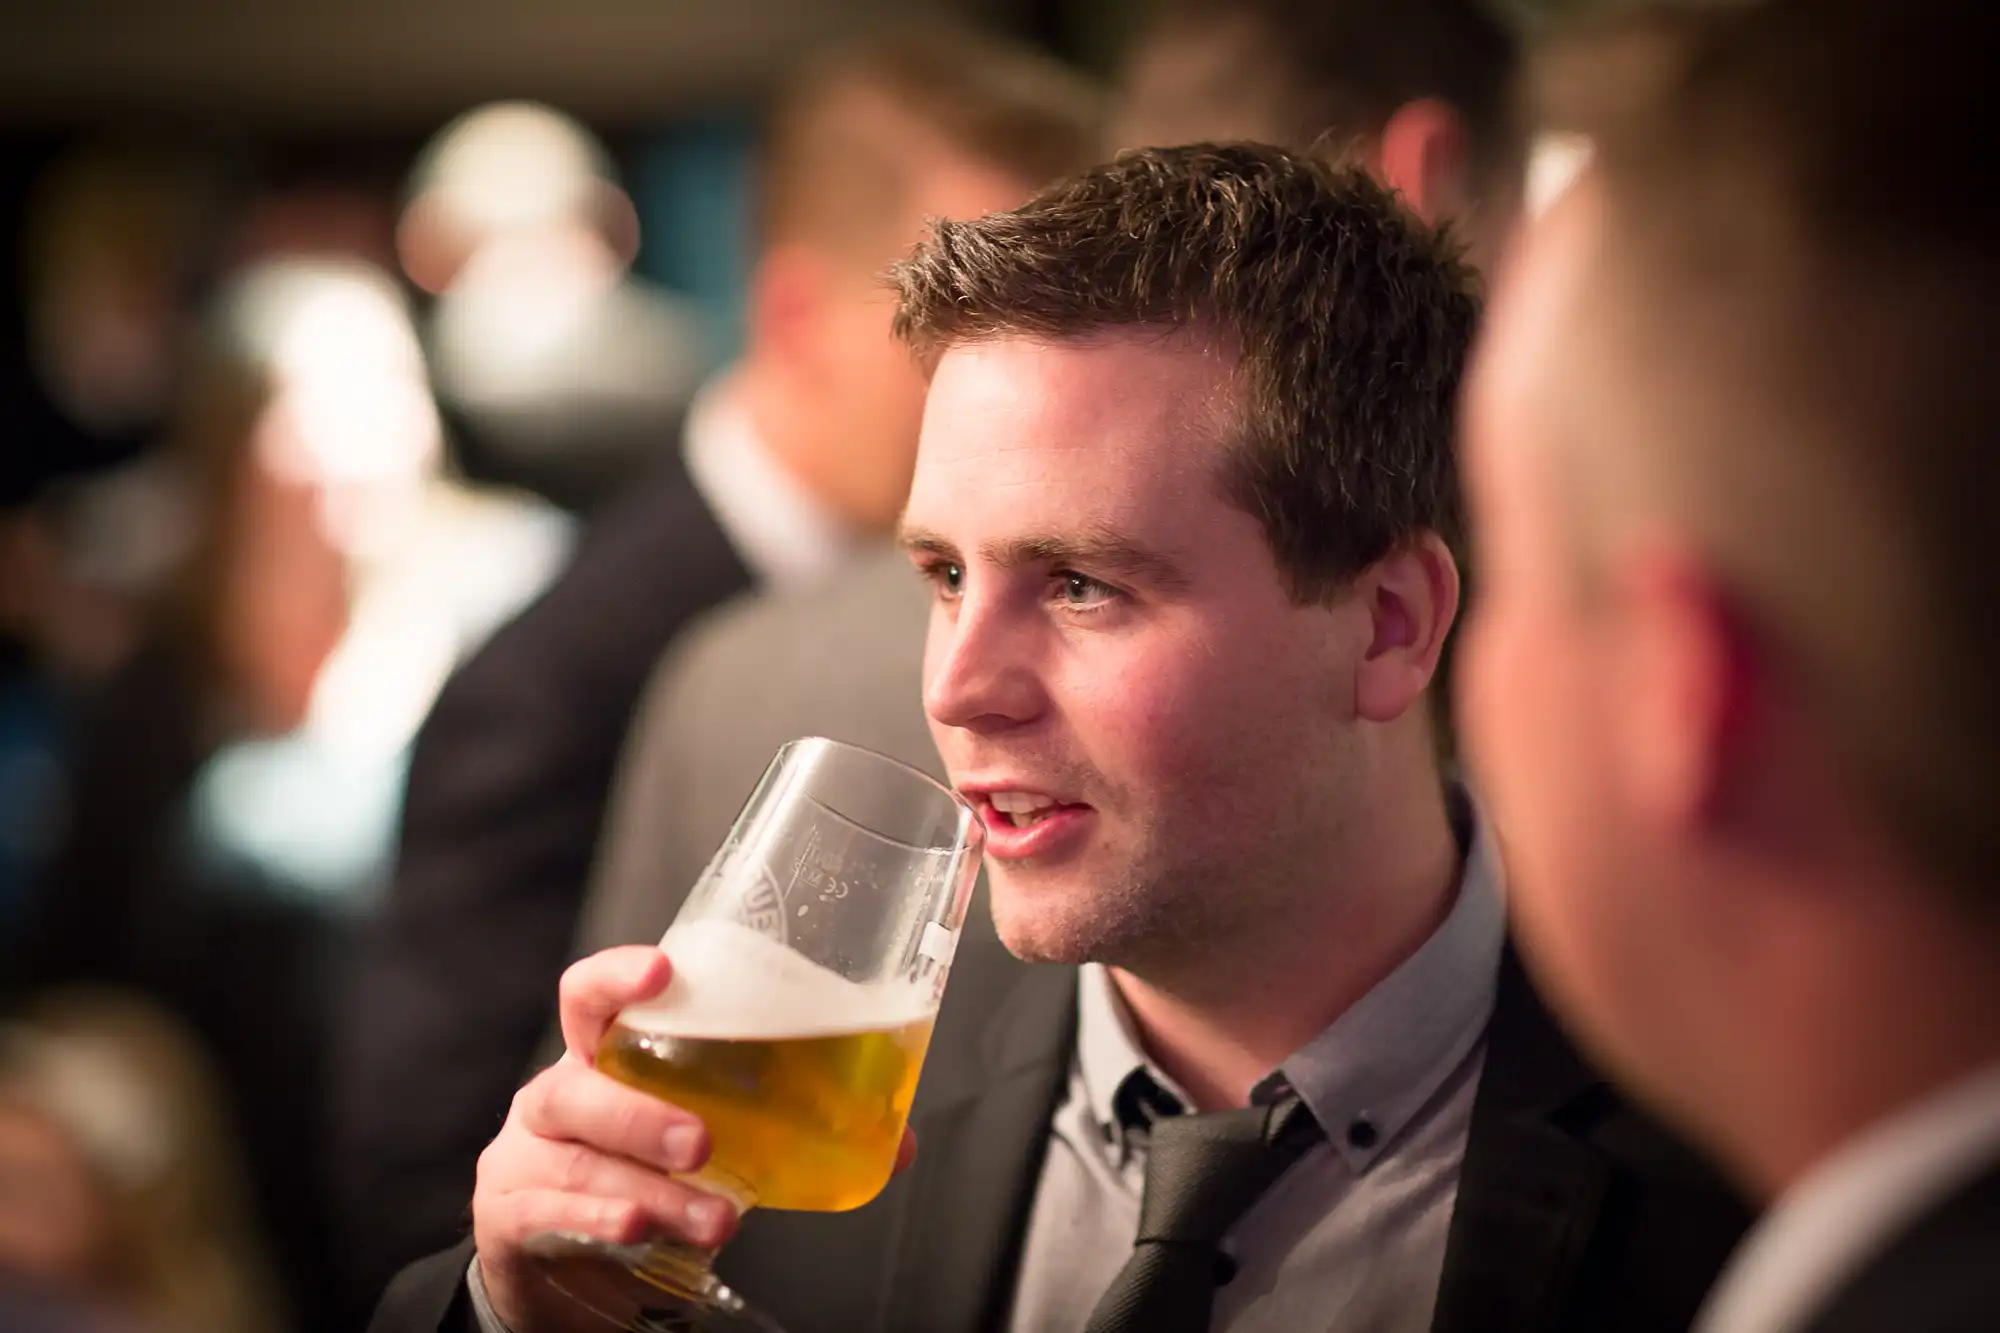 A man in a suit holding a beer glass, engaging in conversation at a social event.